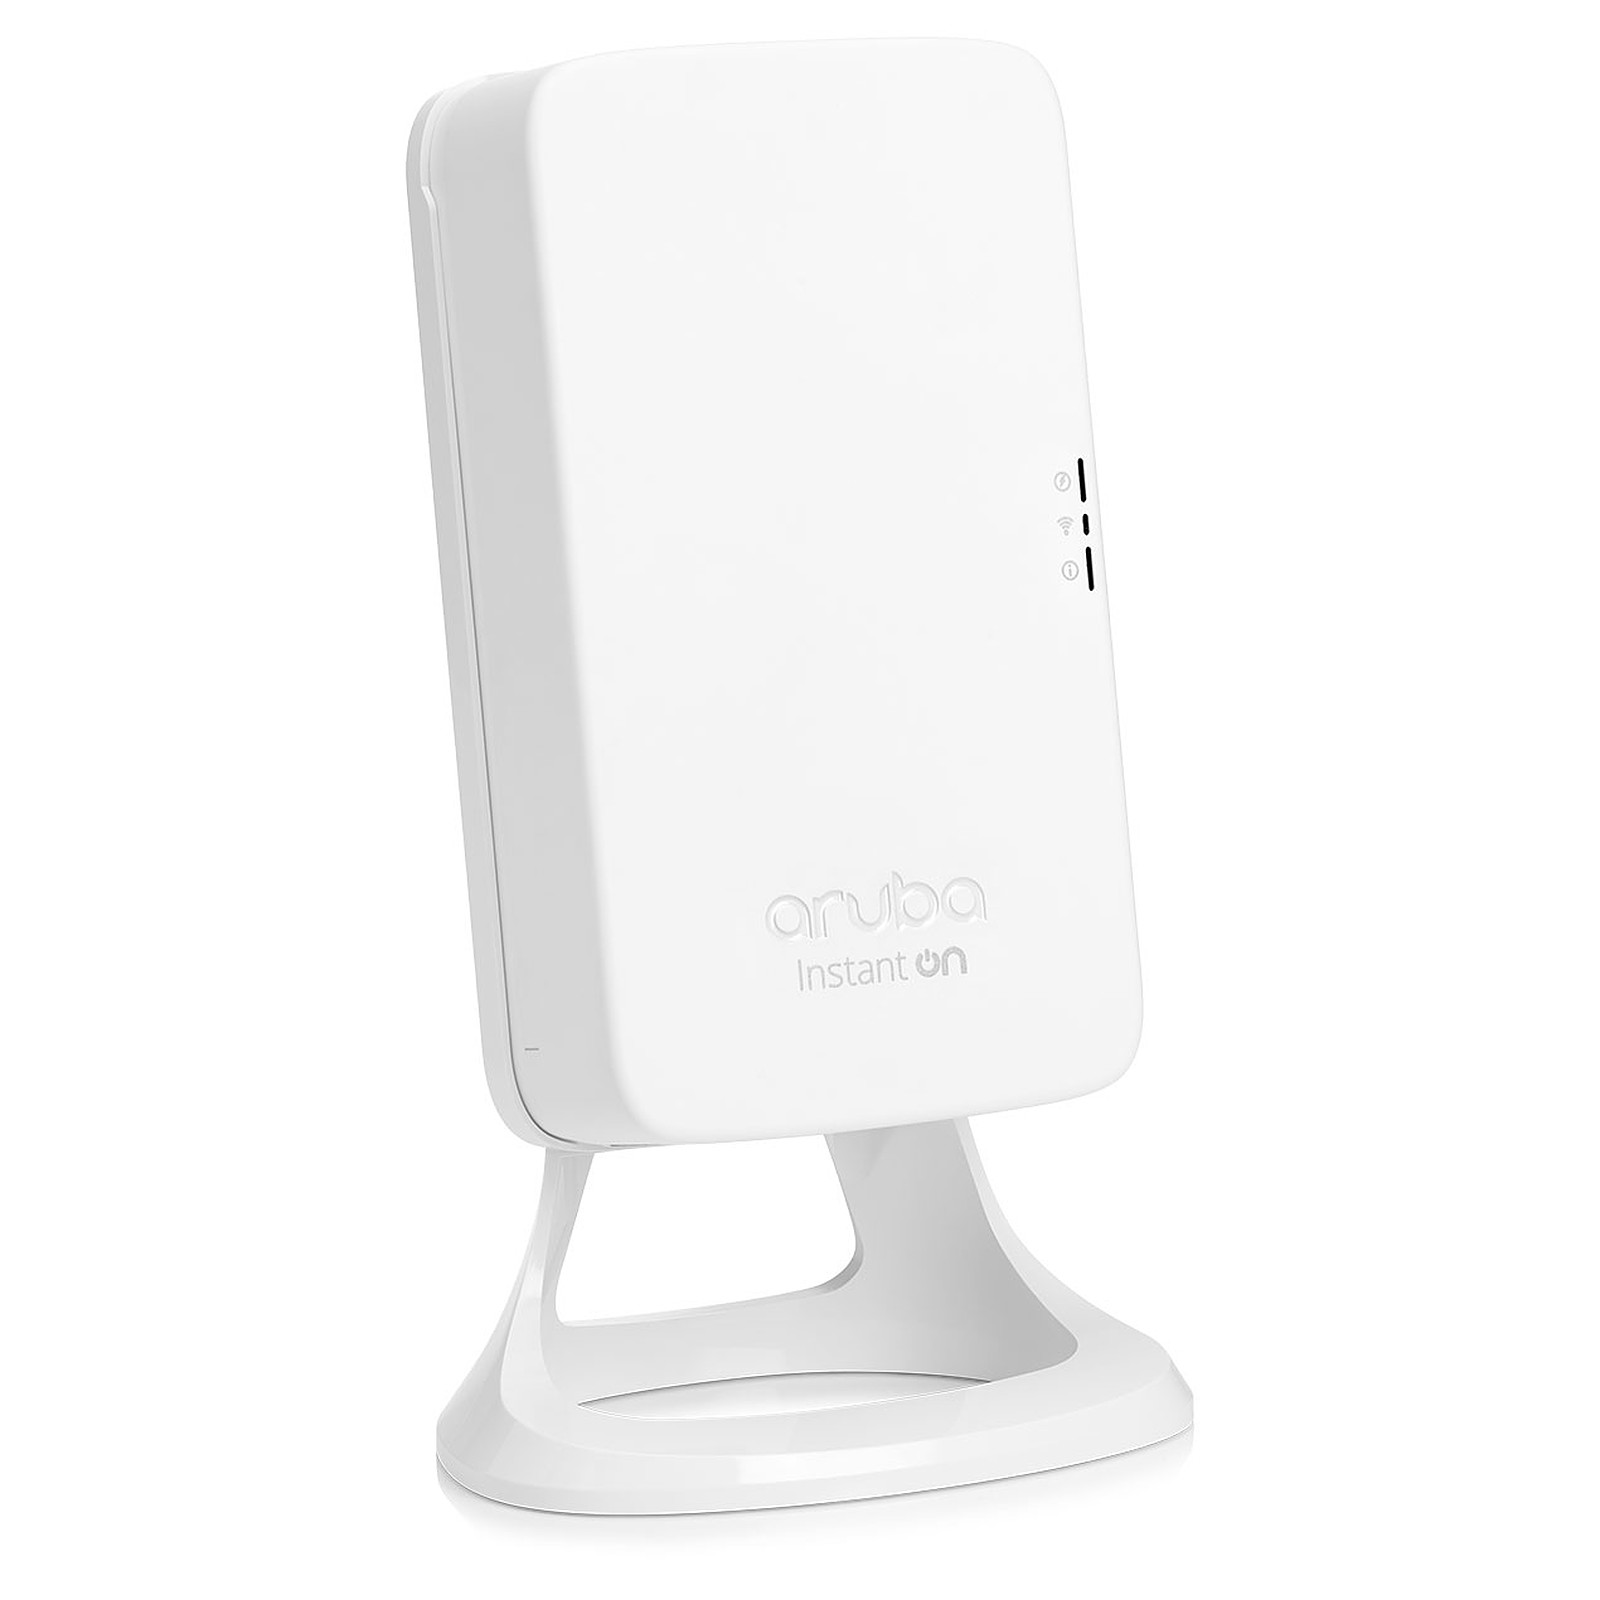 (R2X16A) Aruba Instant On AP11D (RW) 2x2 11AC. Wave 2 Desk/Wall Access Point 